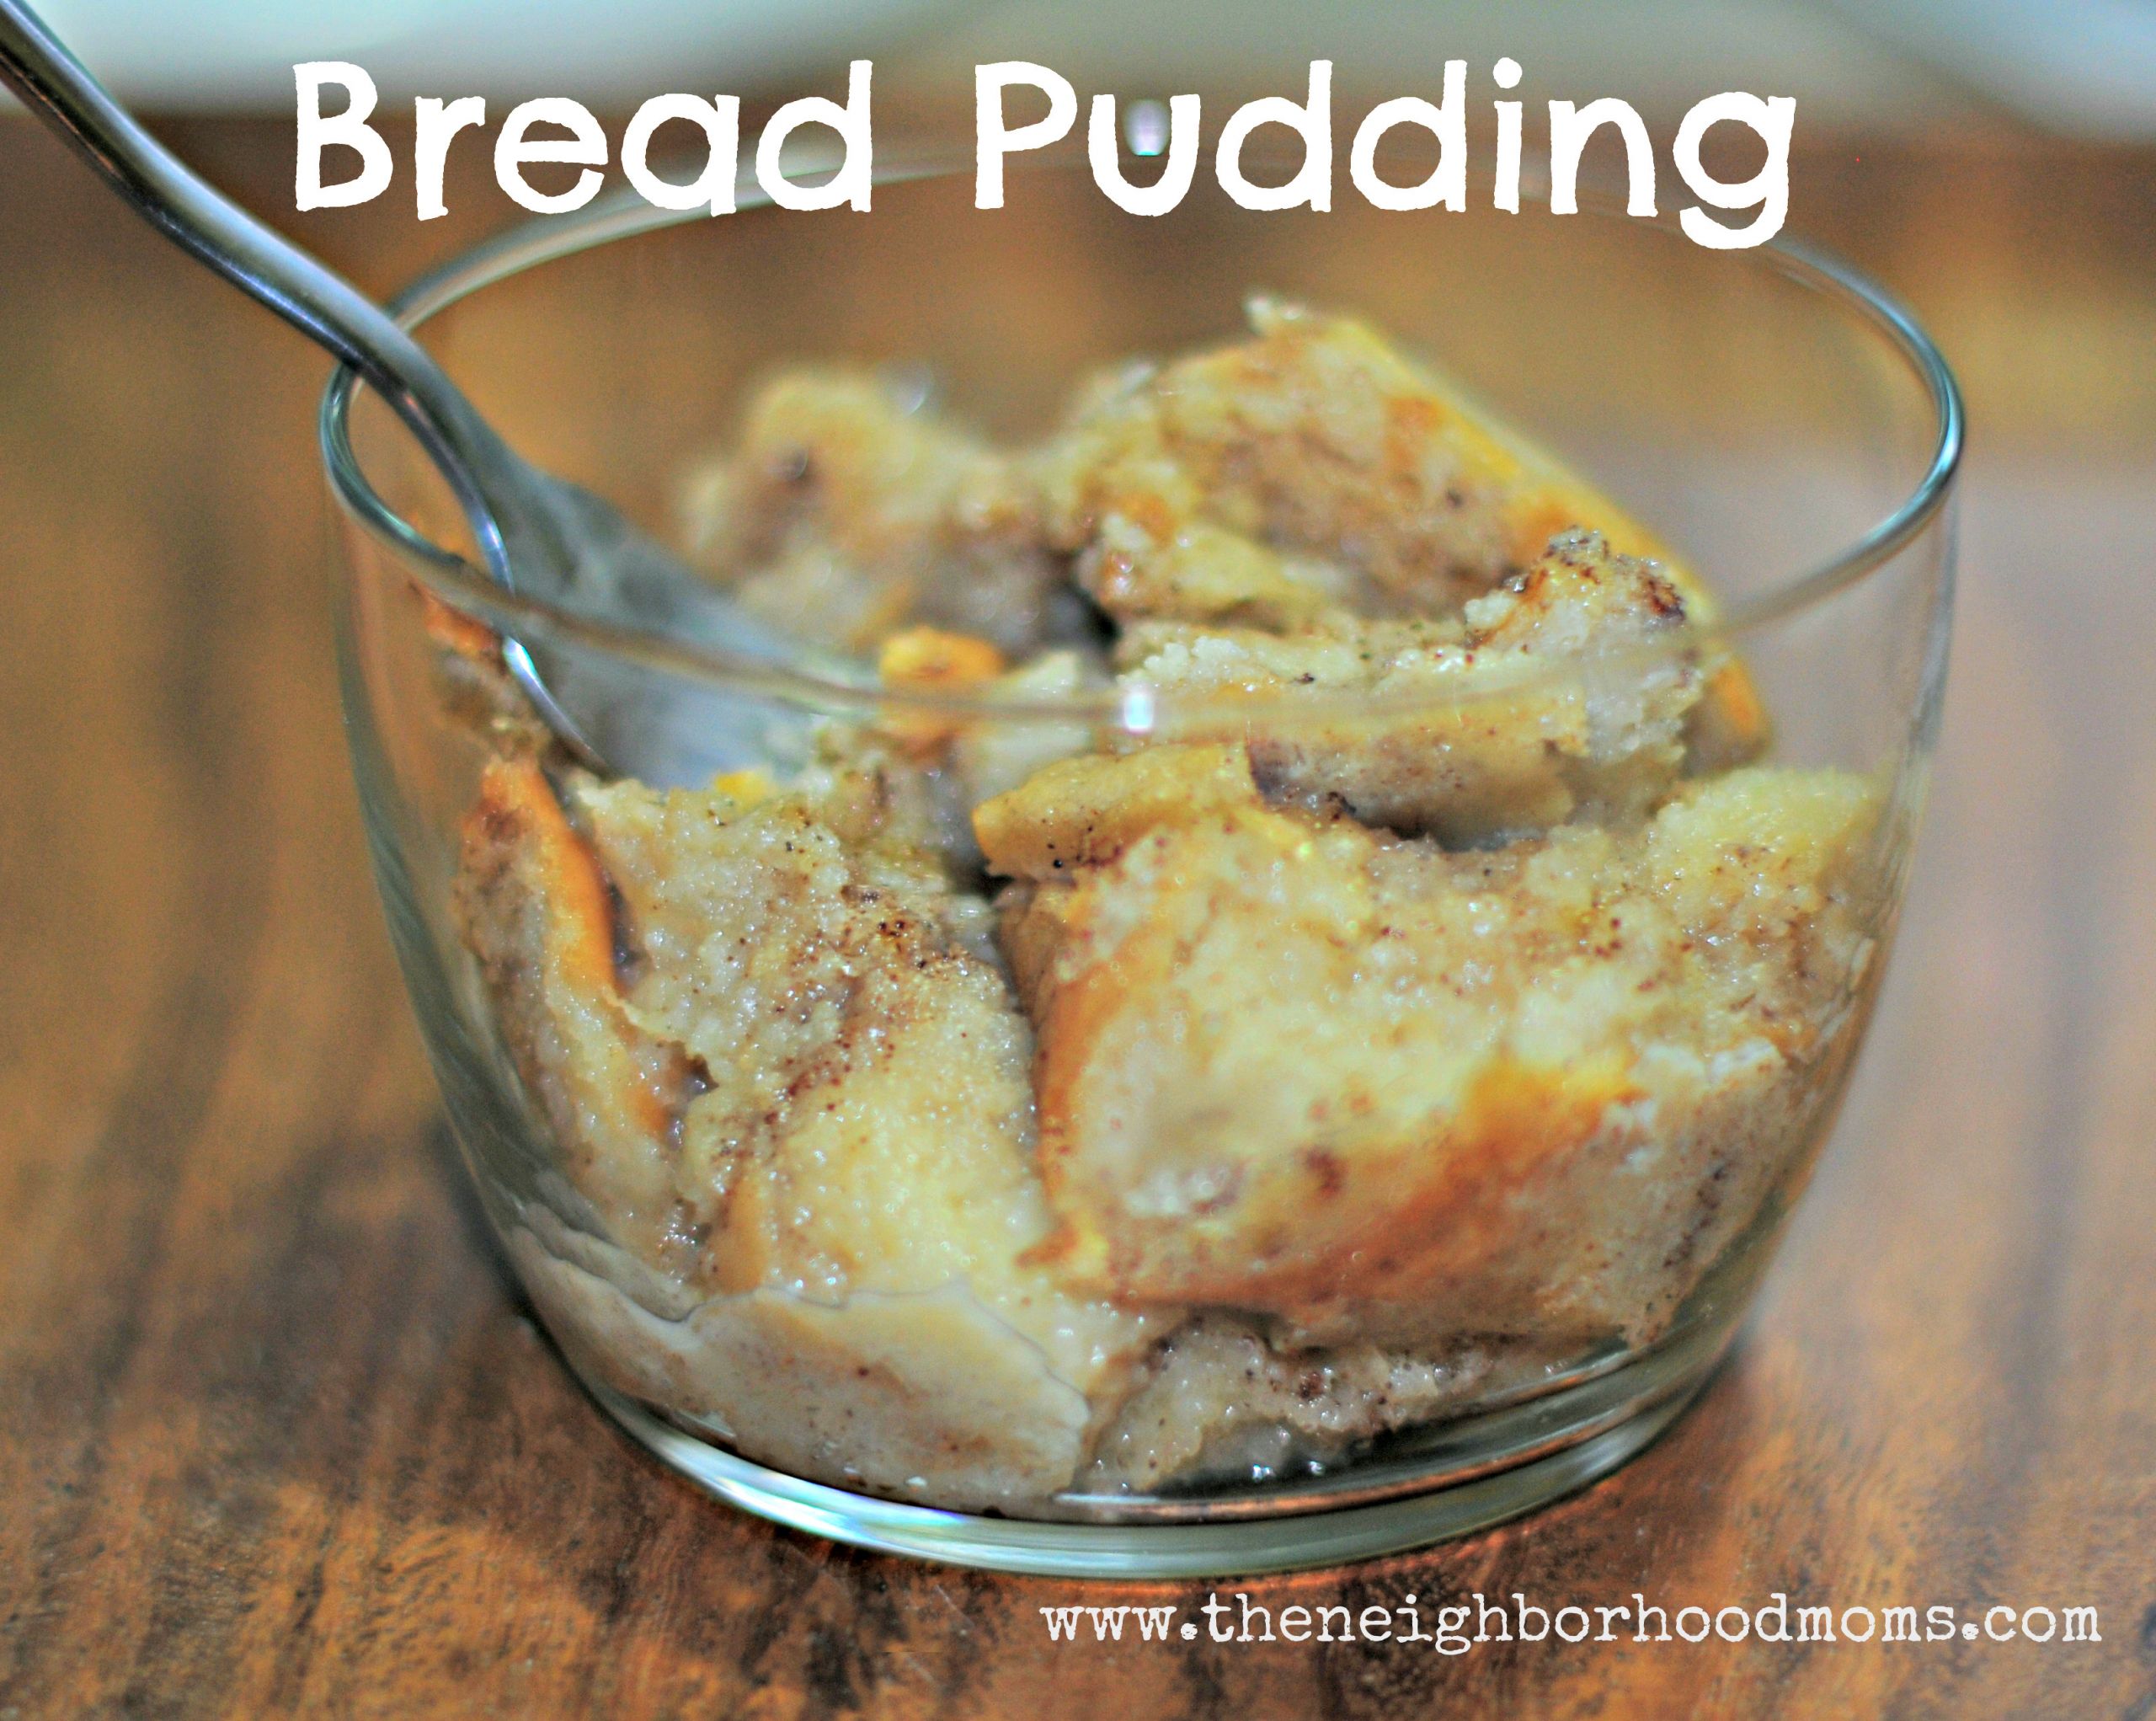 Southern Bread Pudding Recipe
 Easy Southern Bread Pudding The Neighborhood Moms